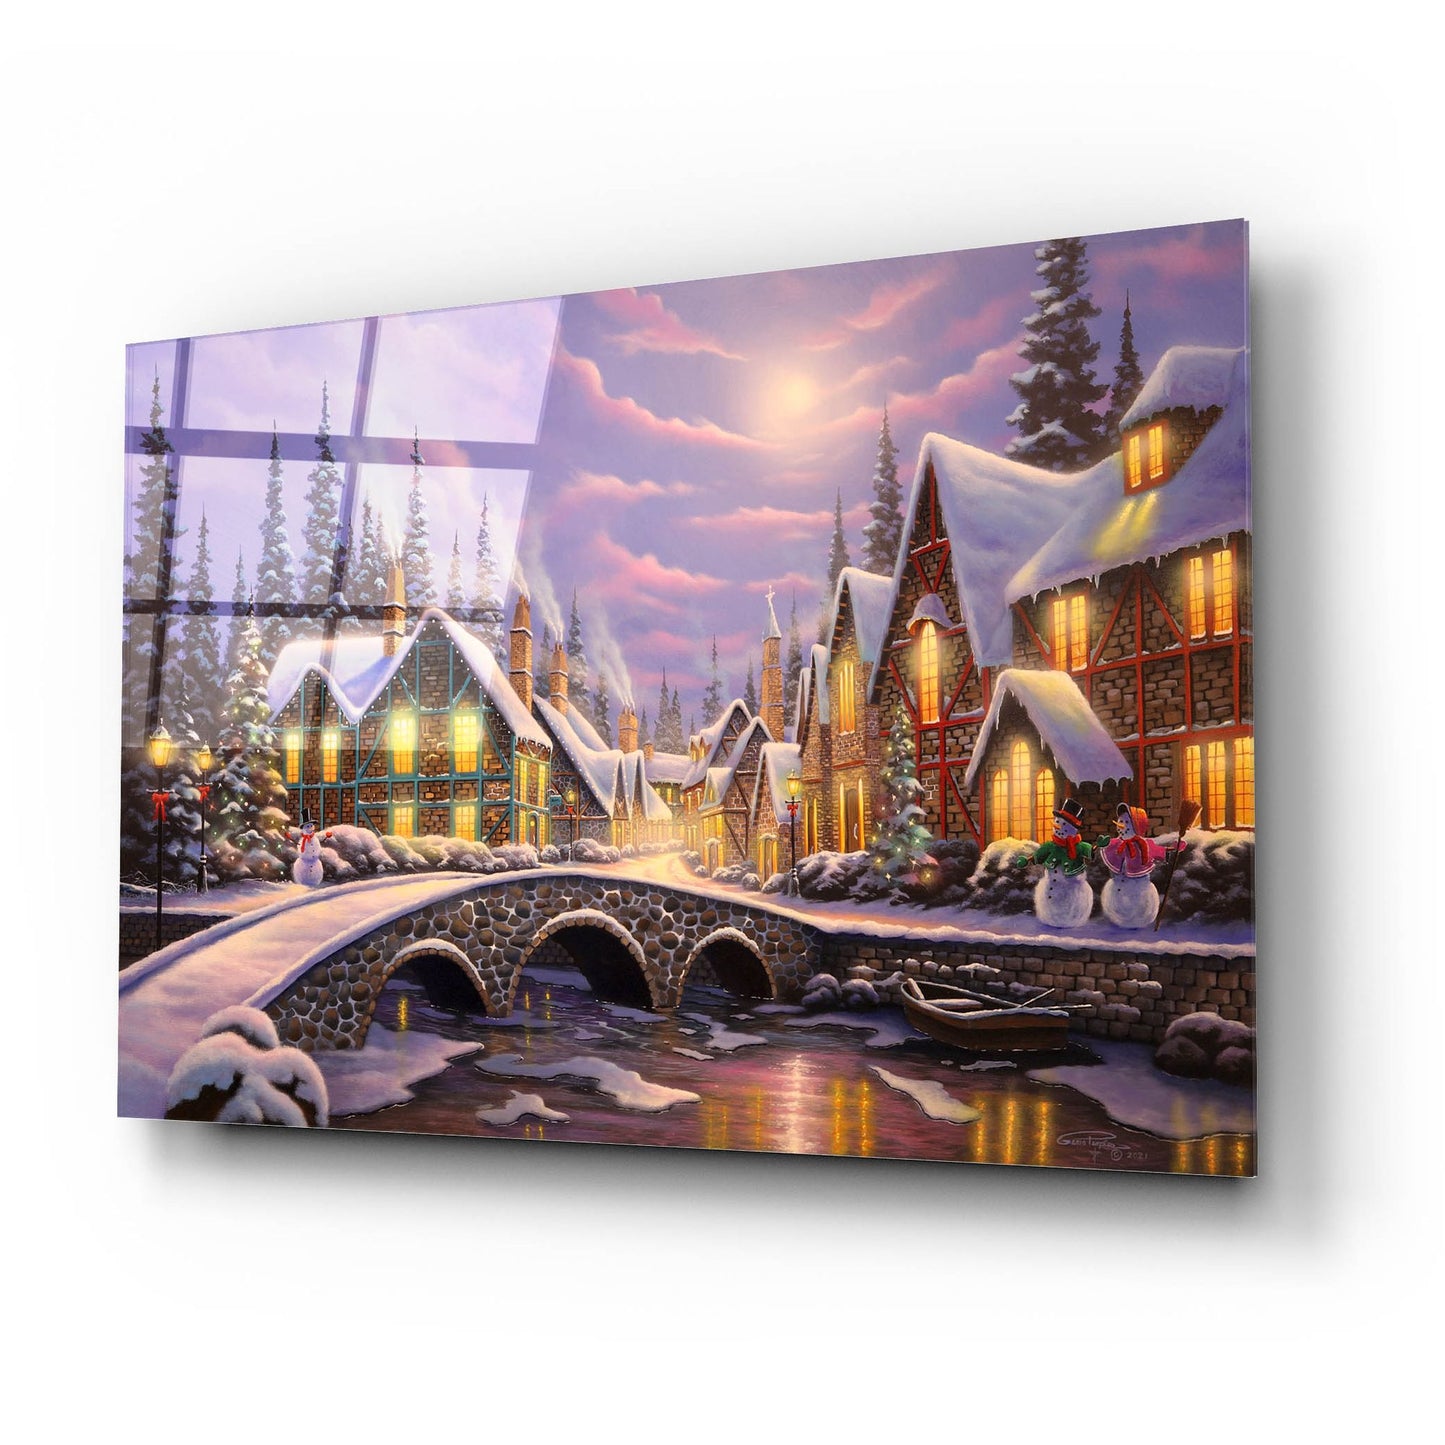 Epic Art 'A Snowy Christmas' by Geno Peoples, Acrylic Glass Wall Art,24x16